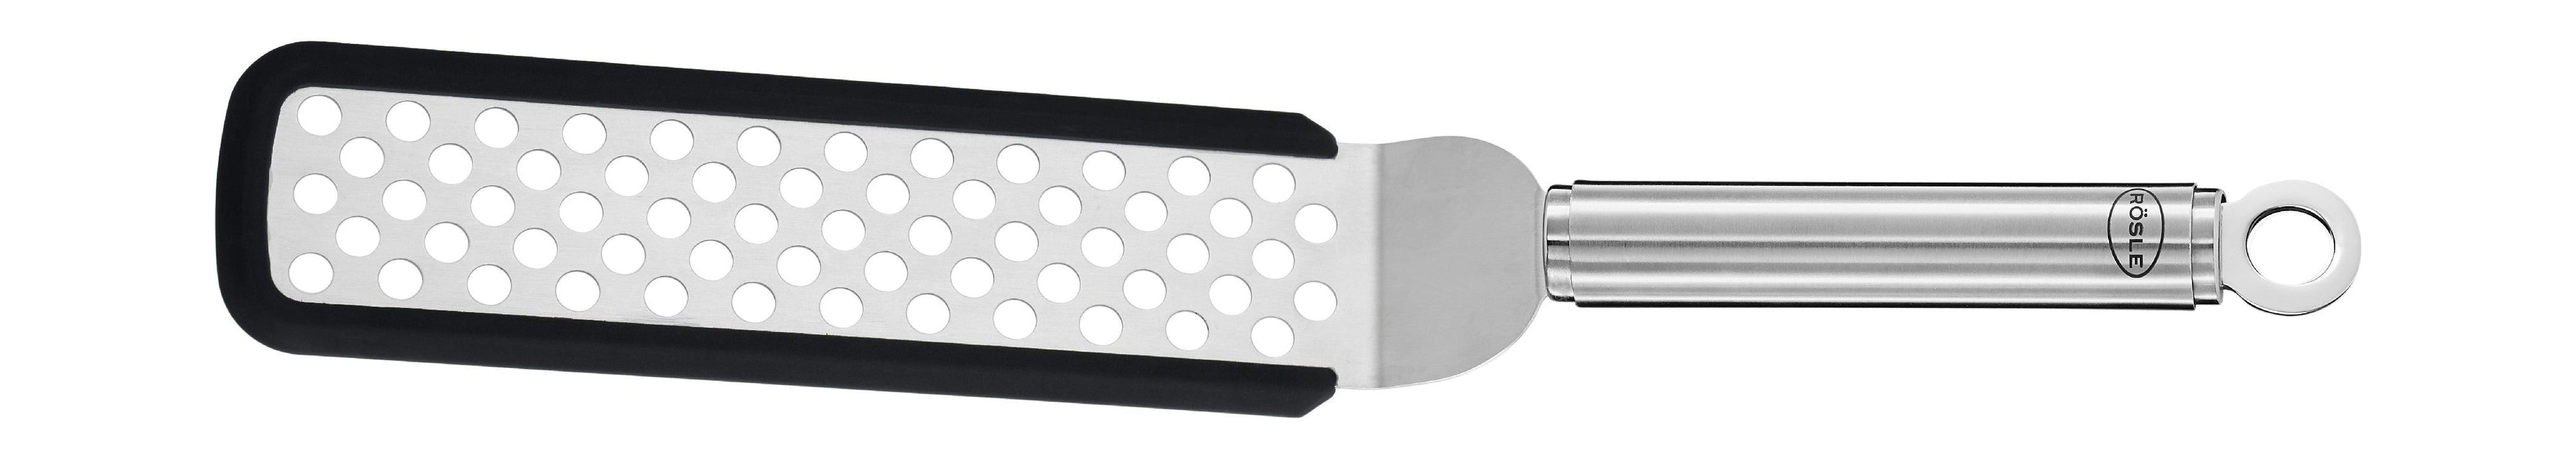 Rösle Spatula With Holes And Bent 32 X 5 Cm